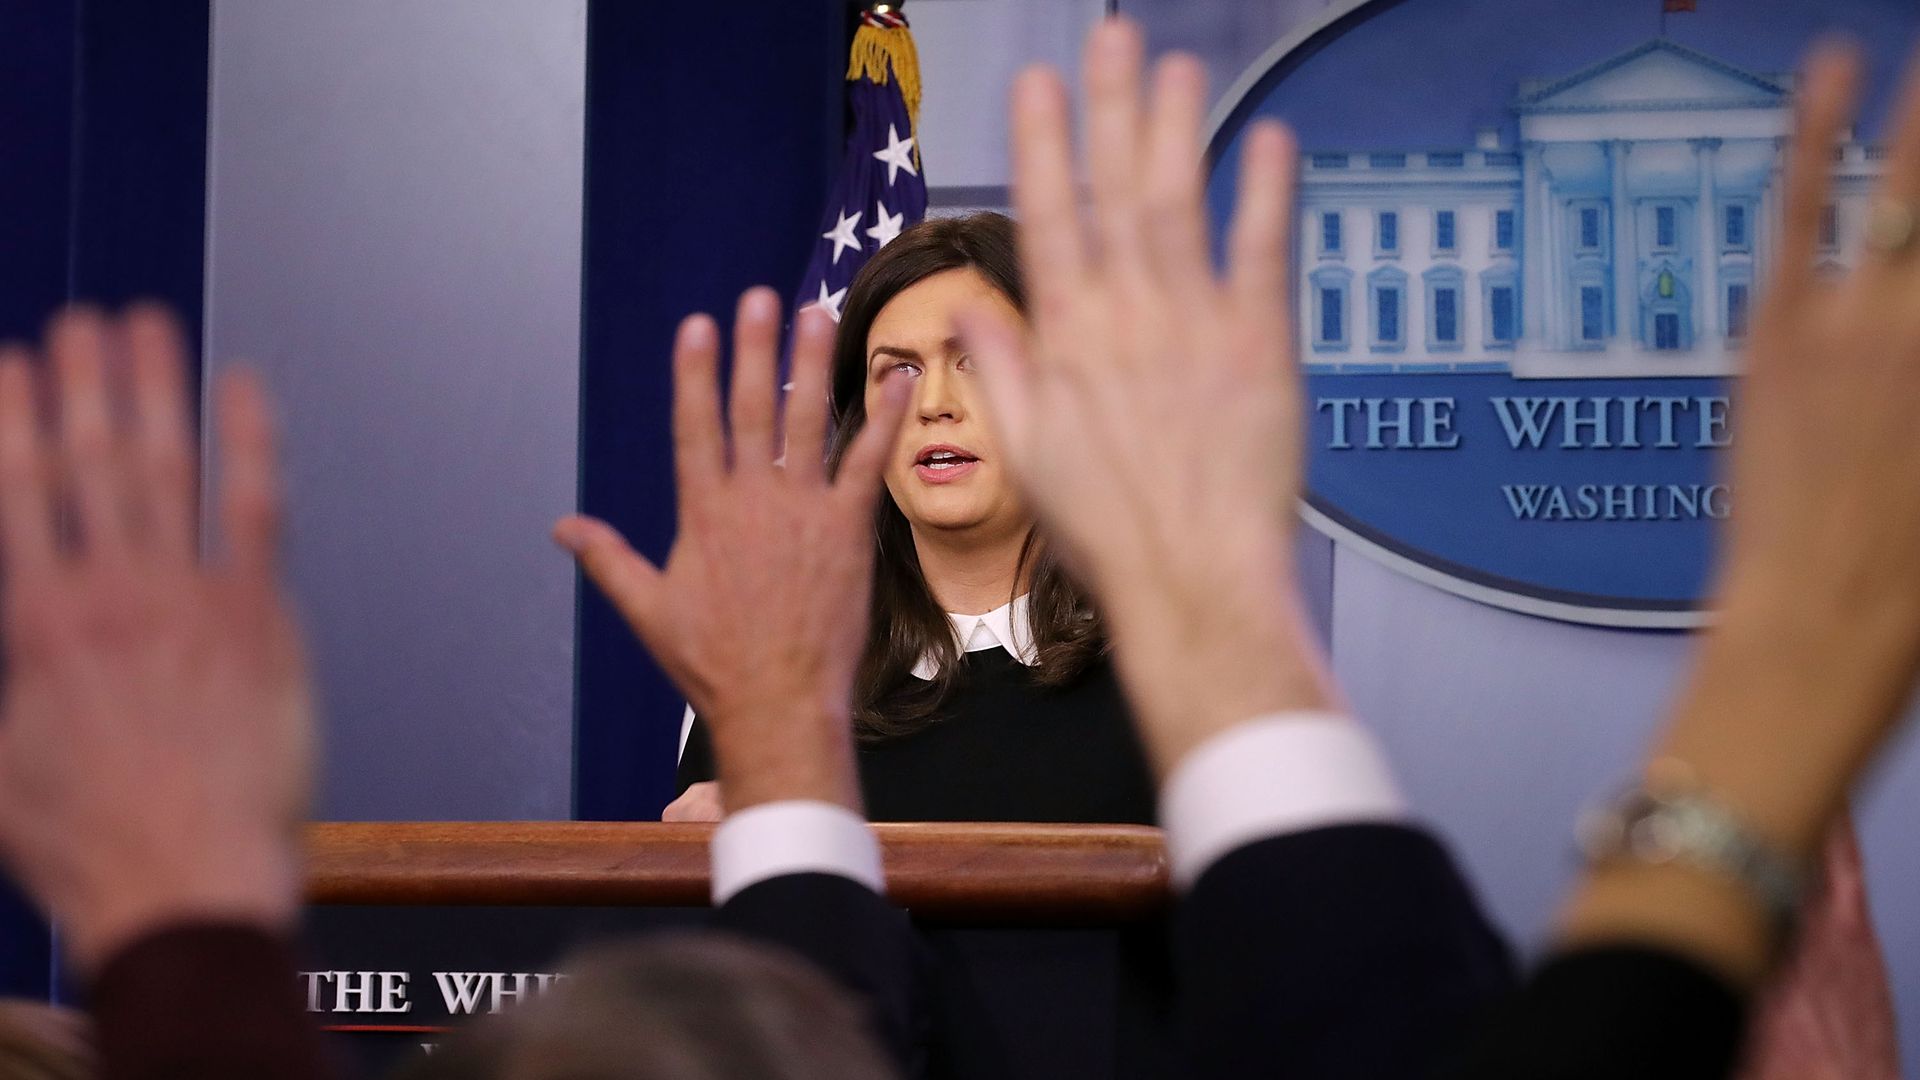 Sarah Sanders takes questions during the White House press briefing.